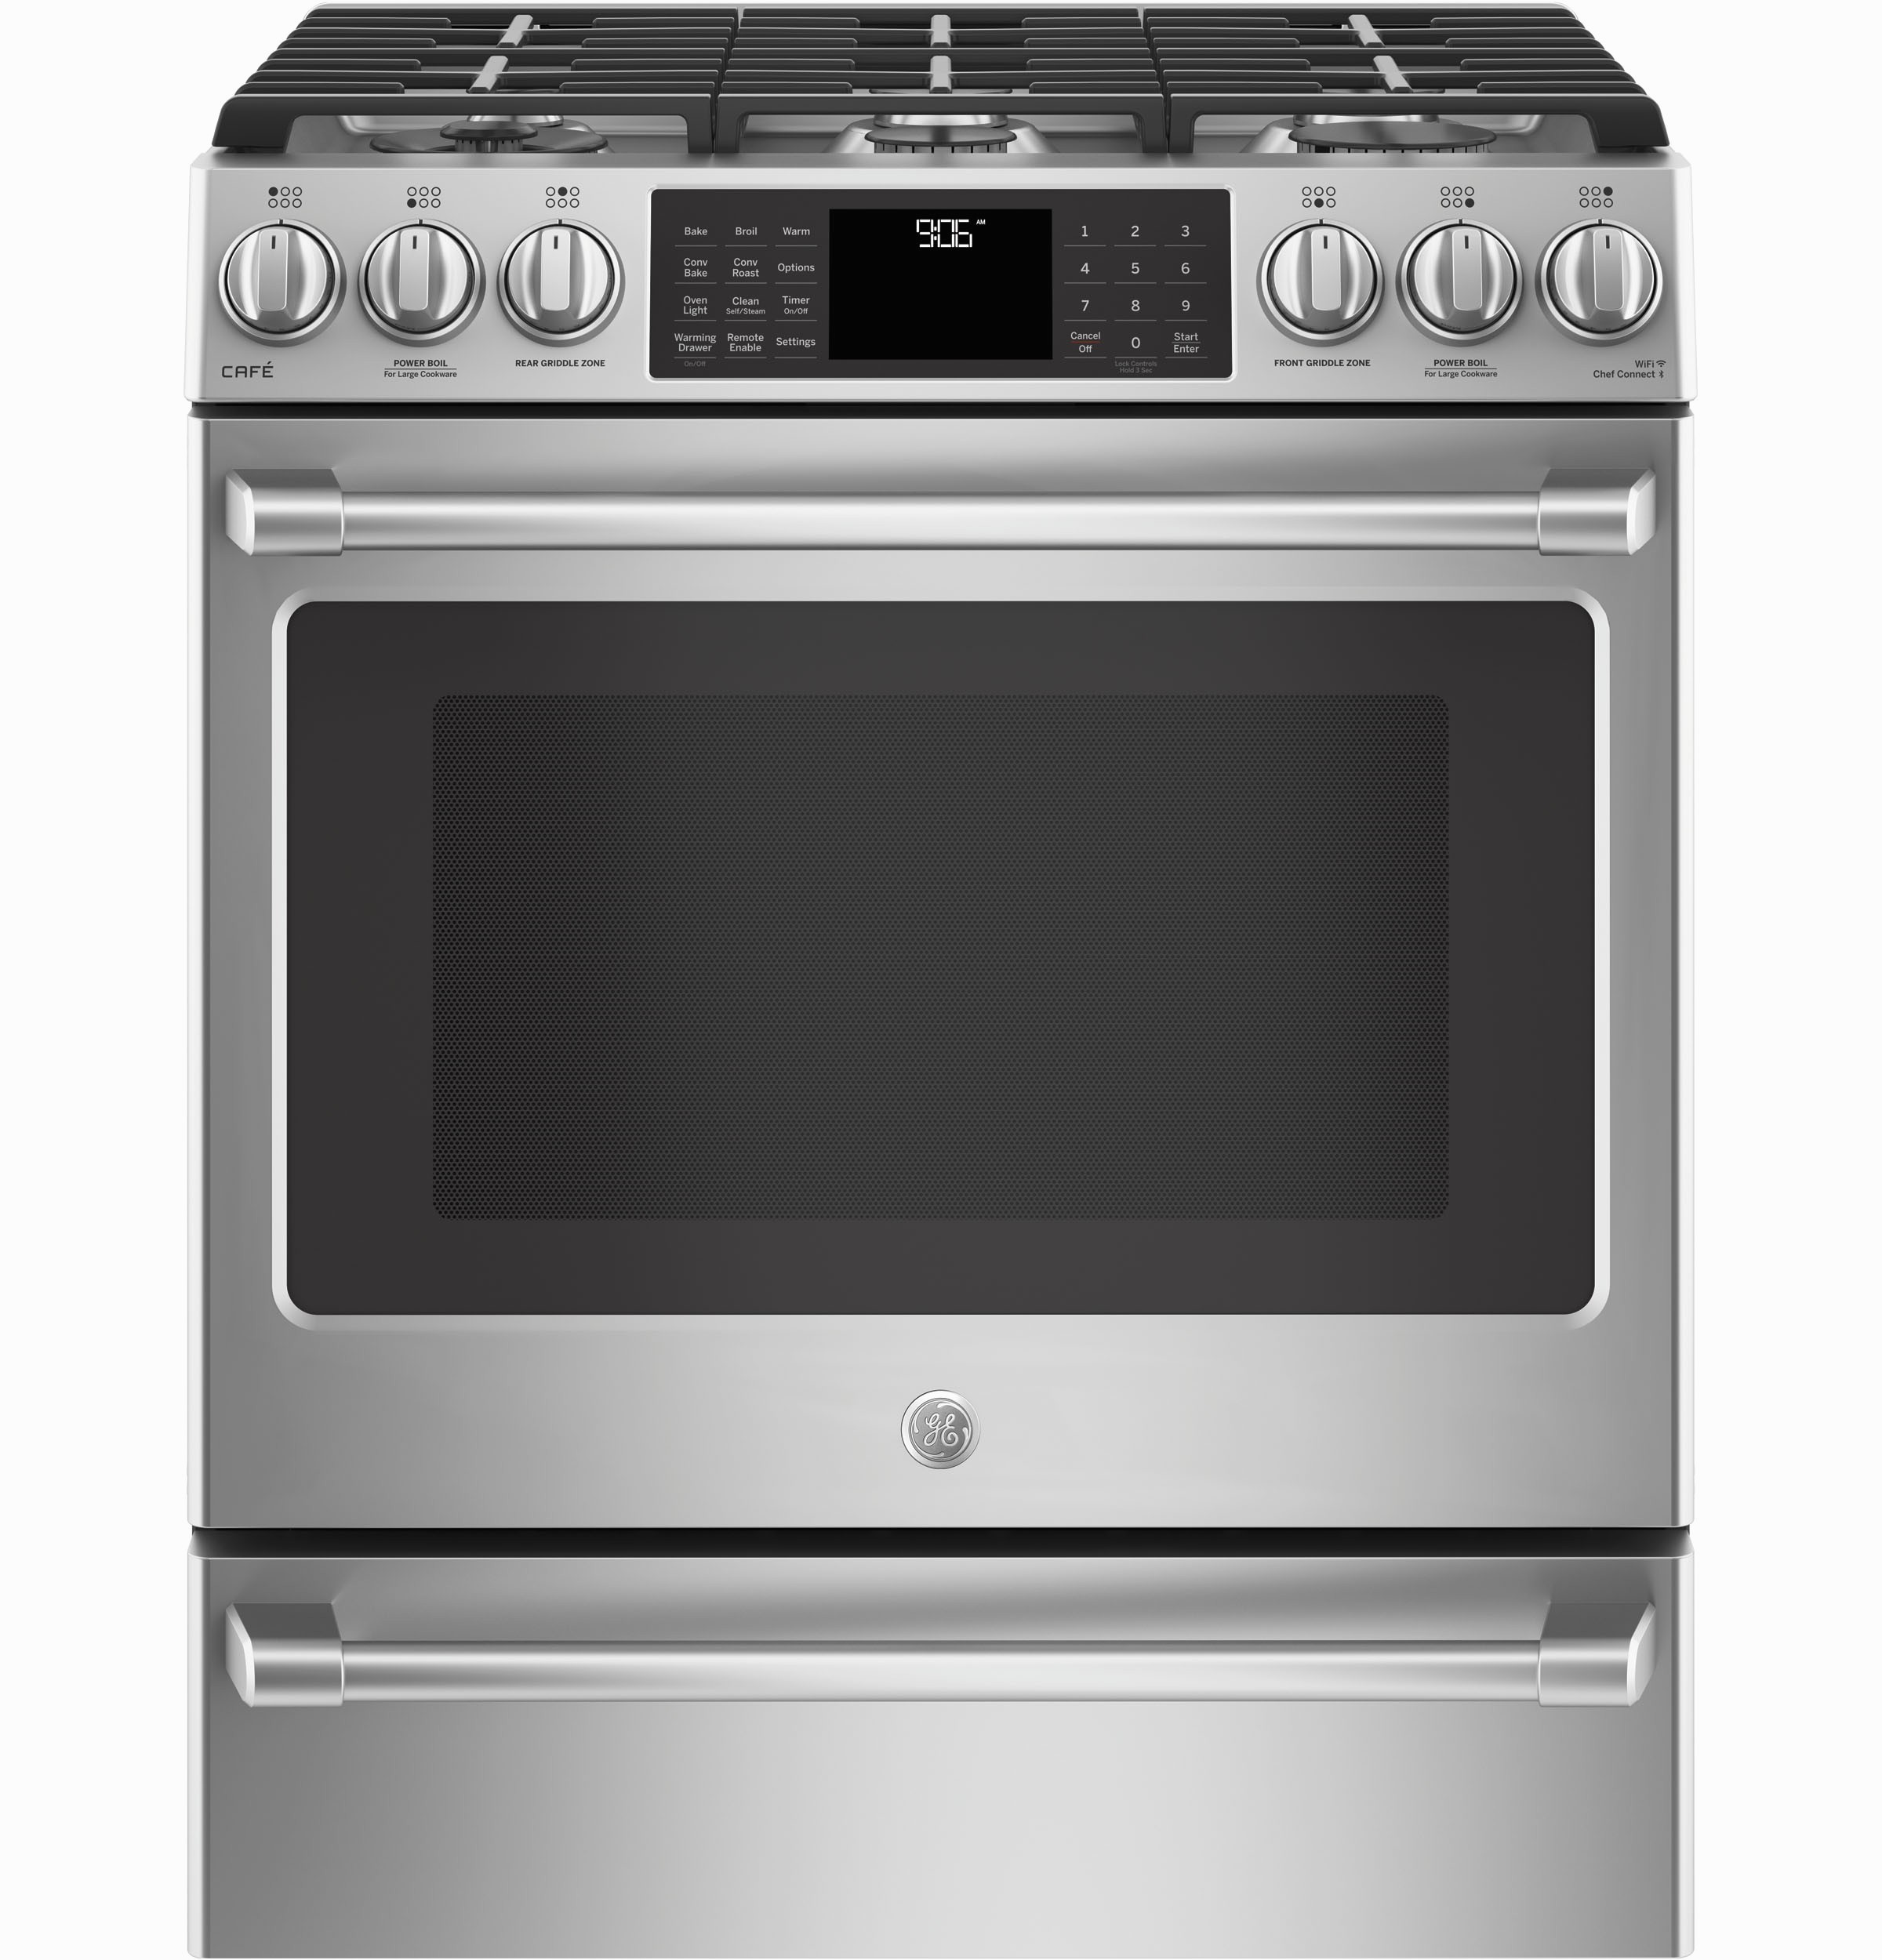 oven for baking fresh ge cafeac284c2a2 series 30quot slide in front control range with warming drawer of oven for baking